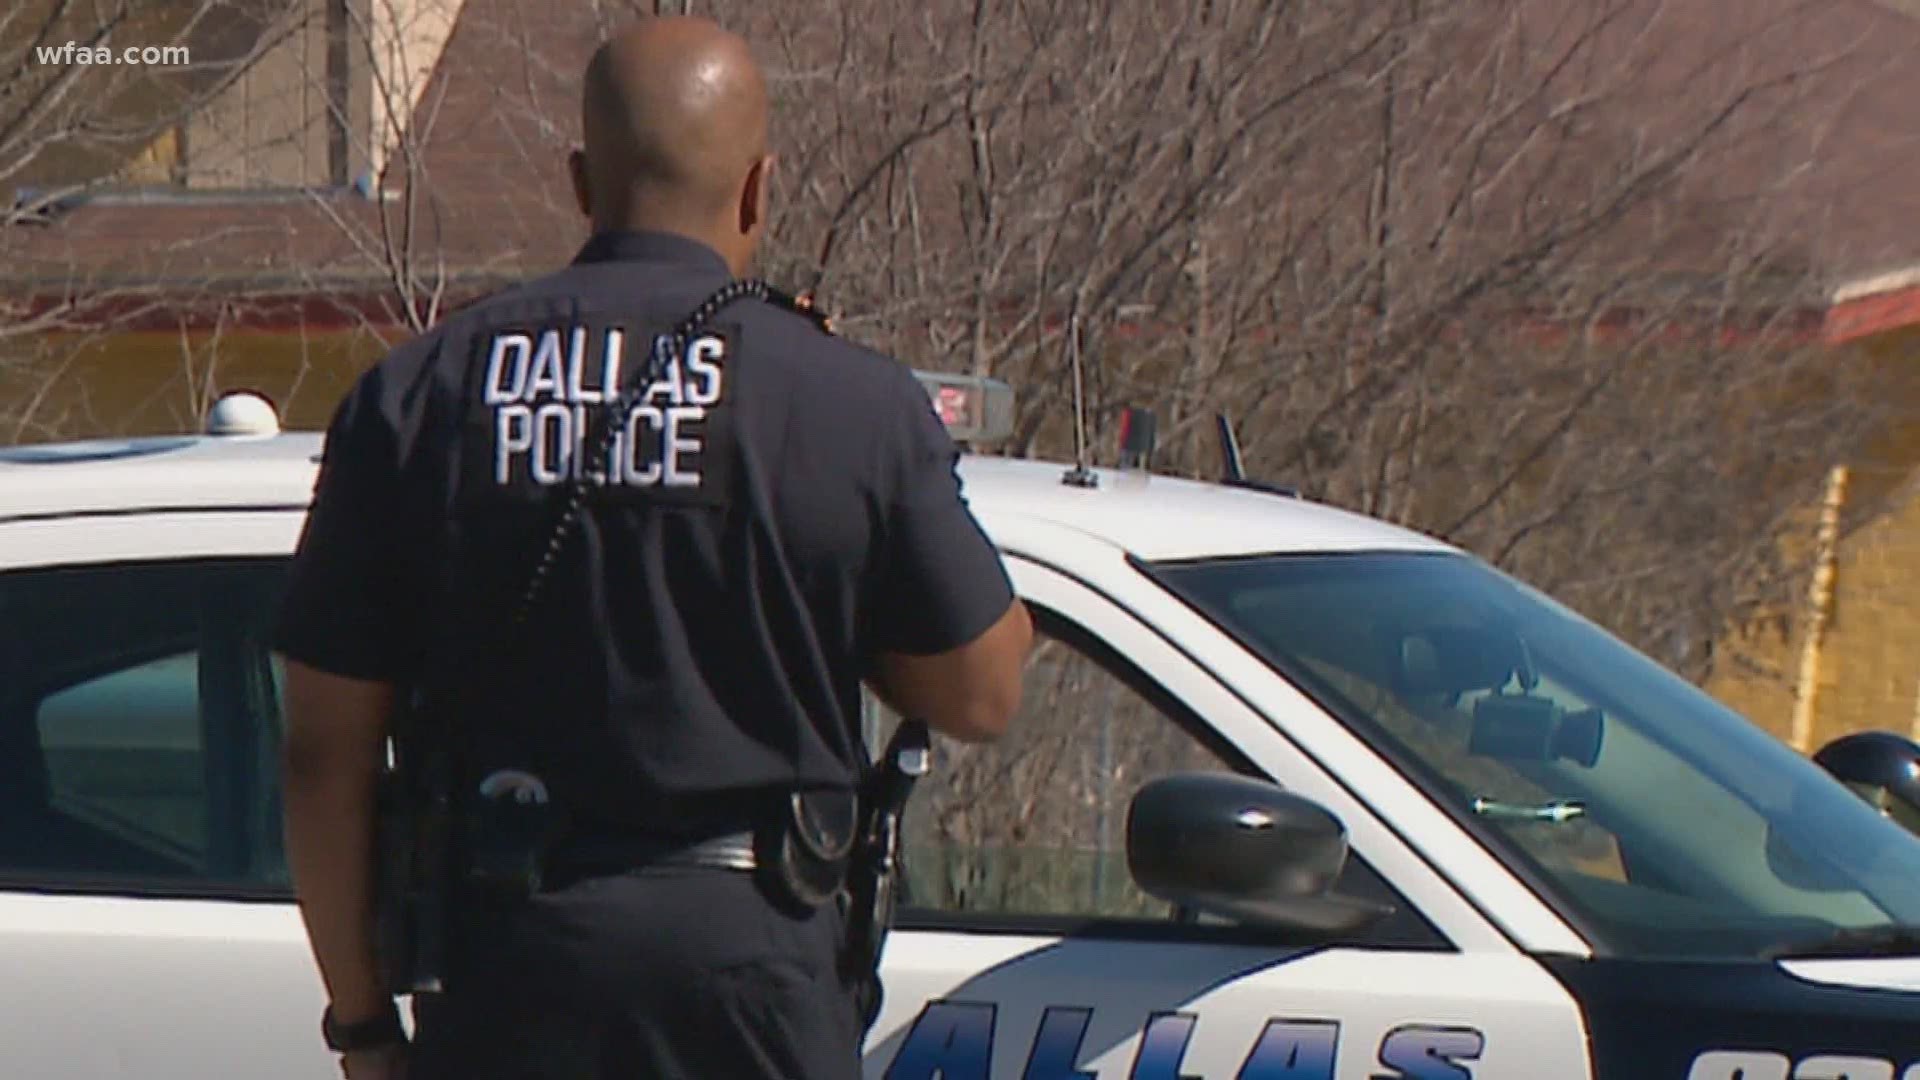 Dallas City Council expressed initial support for cutting $7 million from DPD’s overtime budget for 2021 – a nearly 30% reduction.